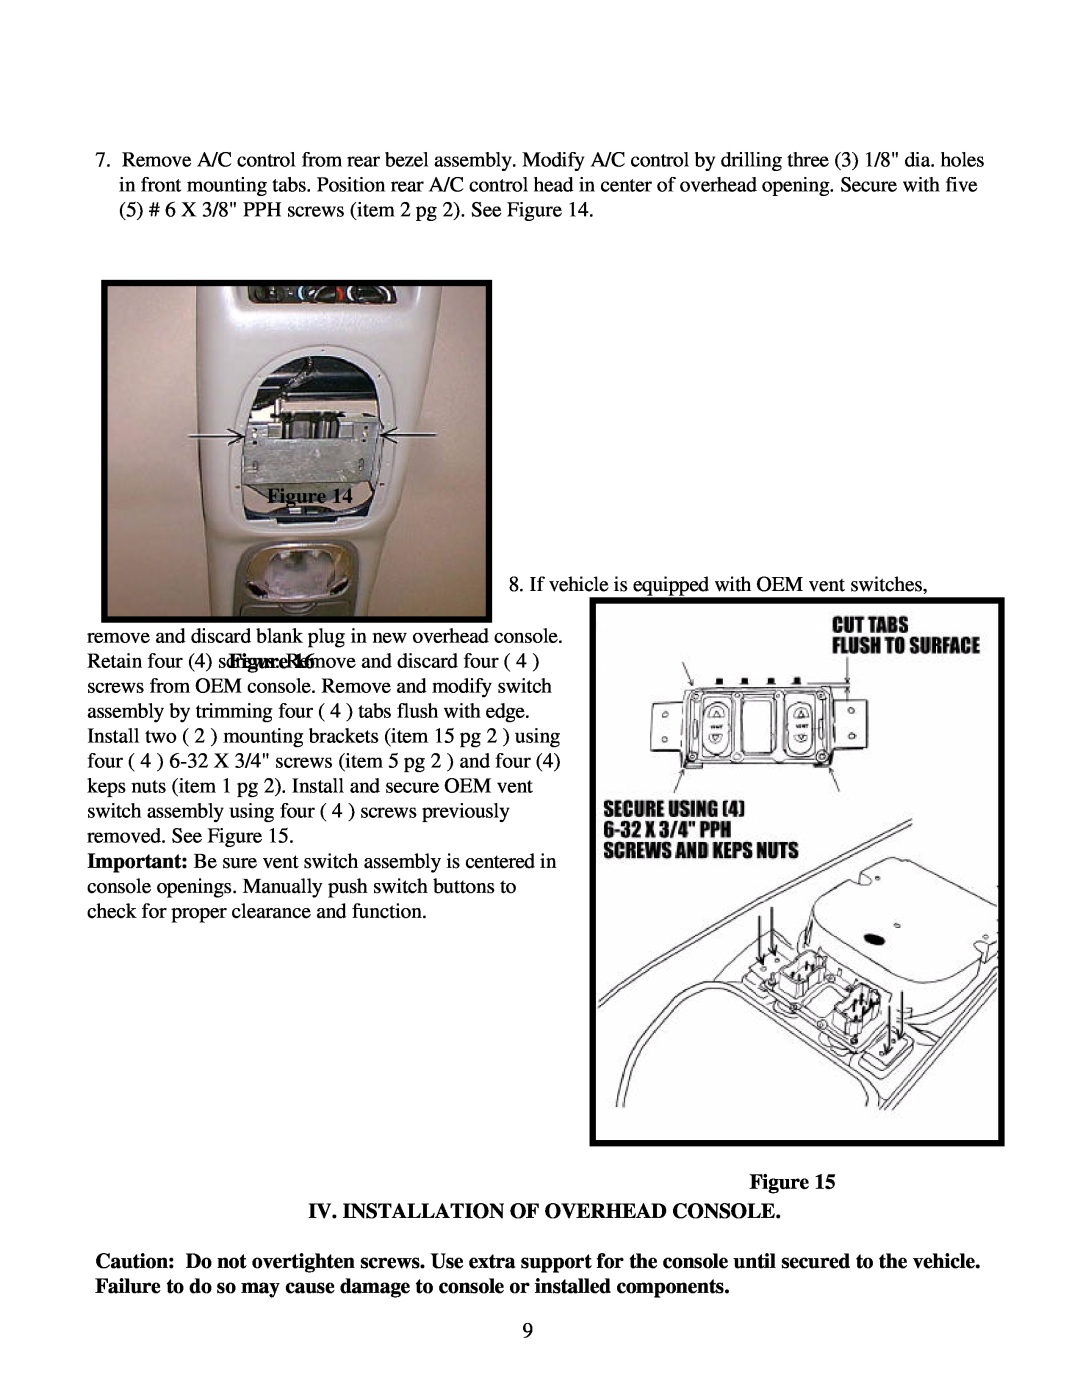 Carson Optical 1181281, 1181280 installation instructions Iv. Installation Of Overhead Console 